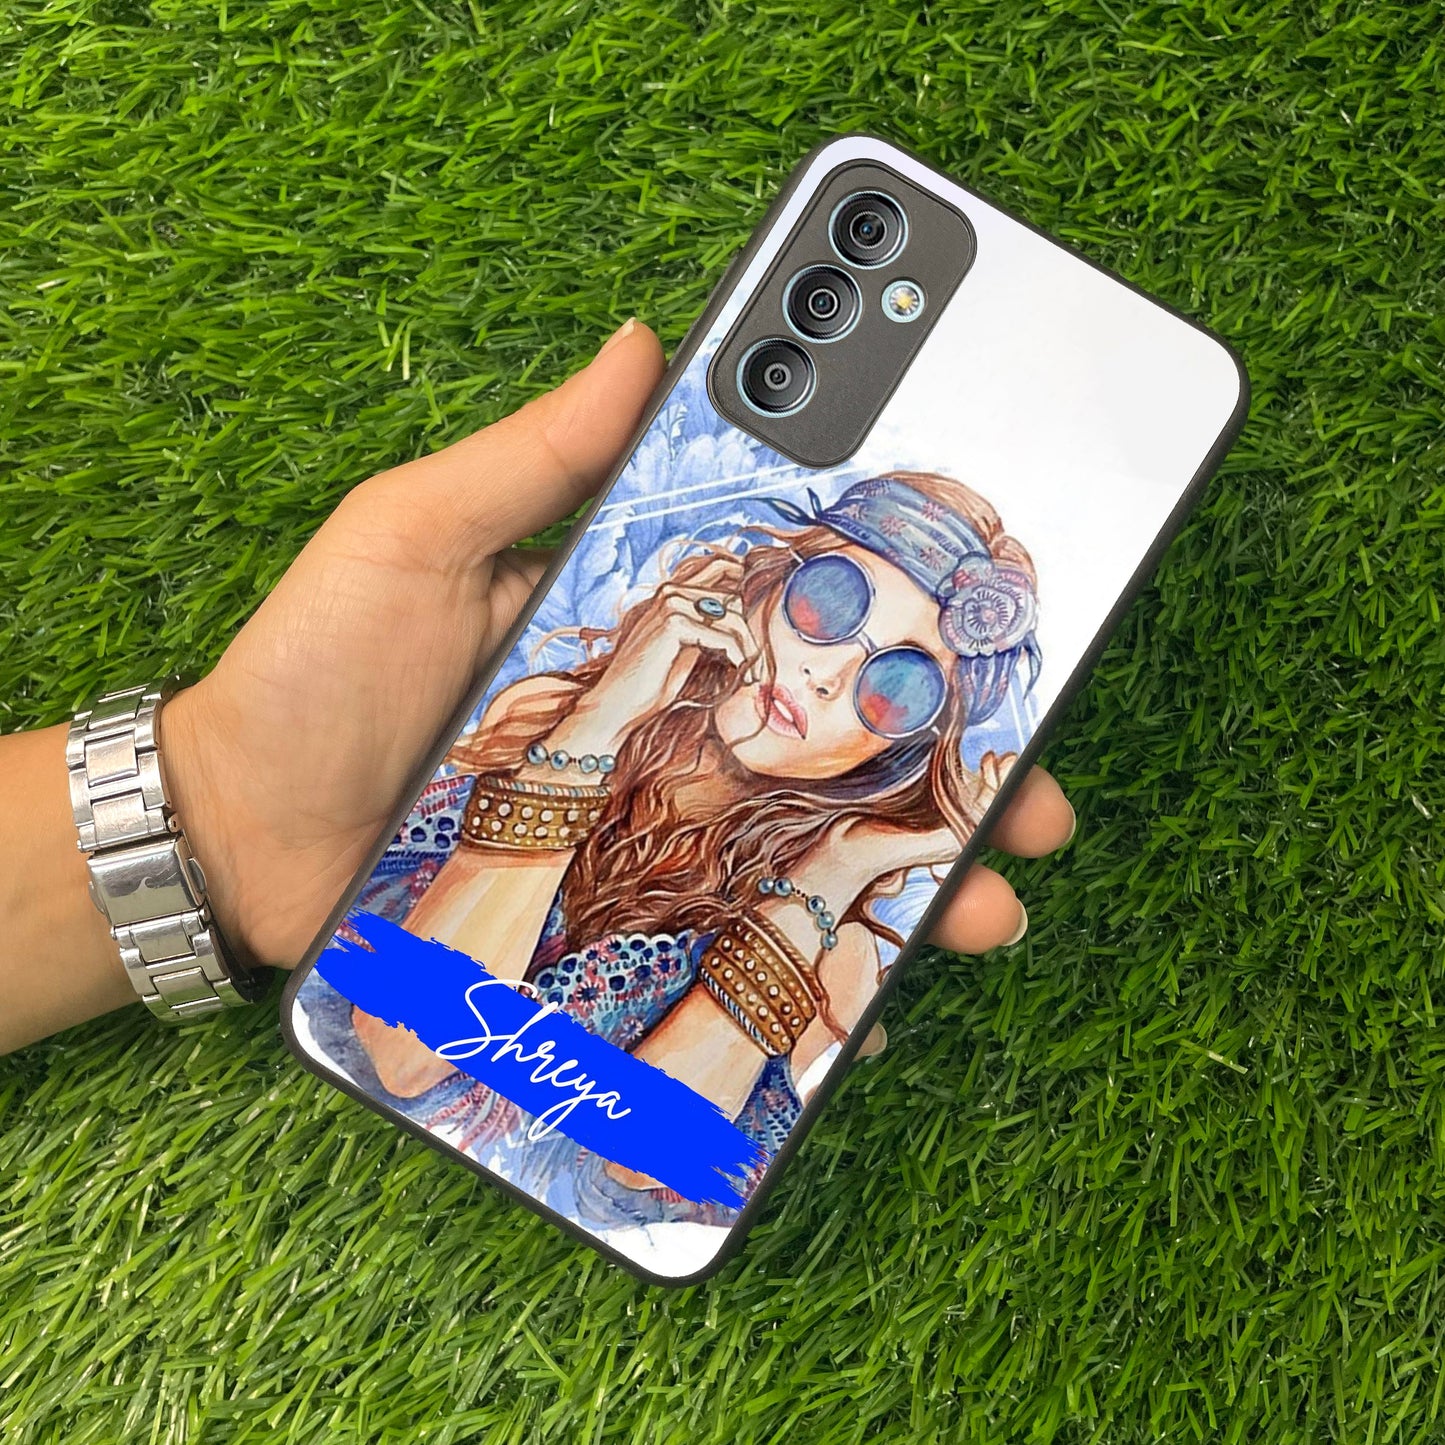 Bindass Babe Customize Glass Case Cover For Samsung